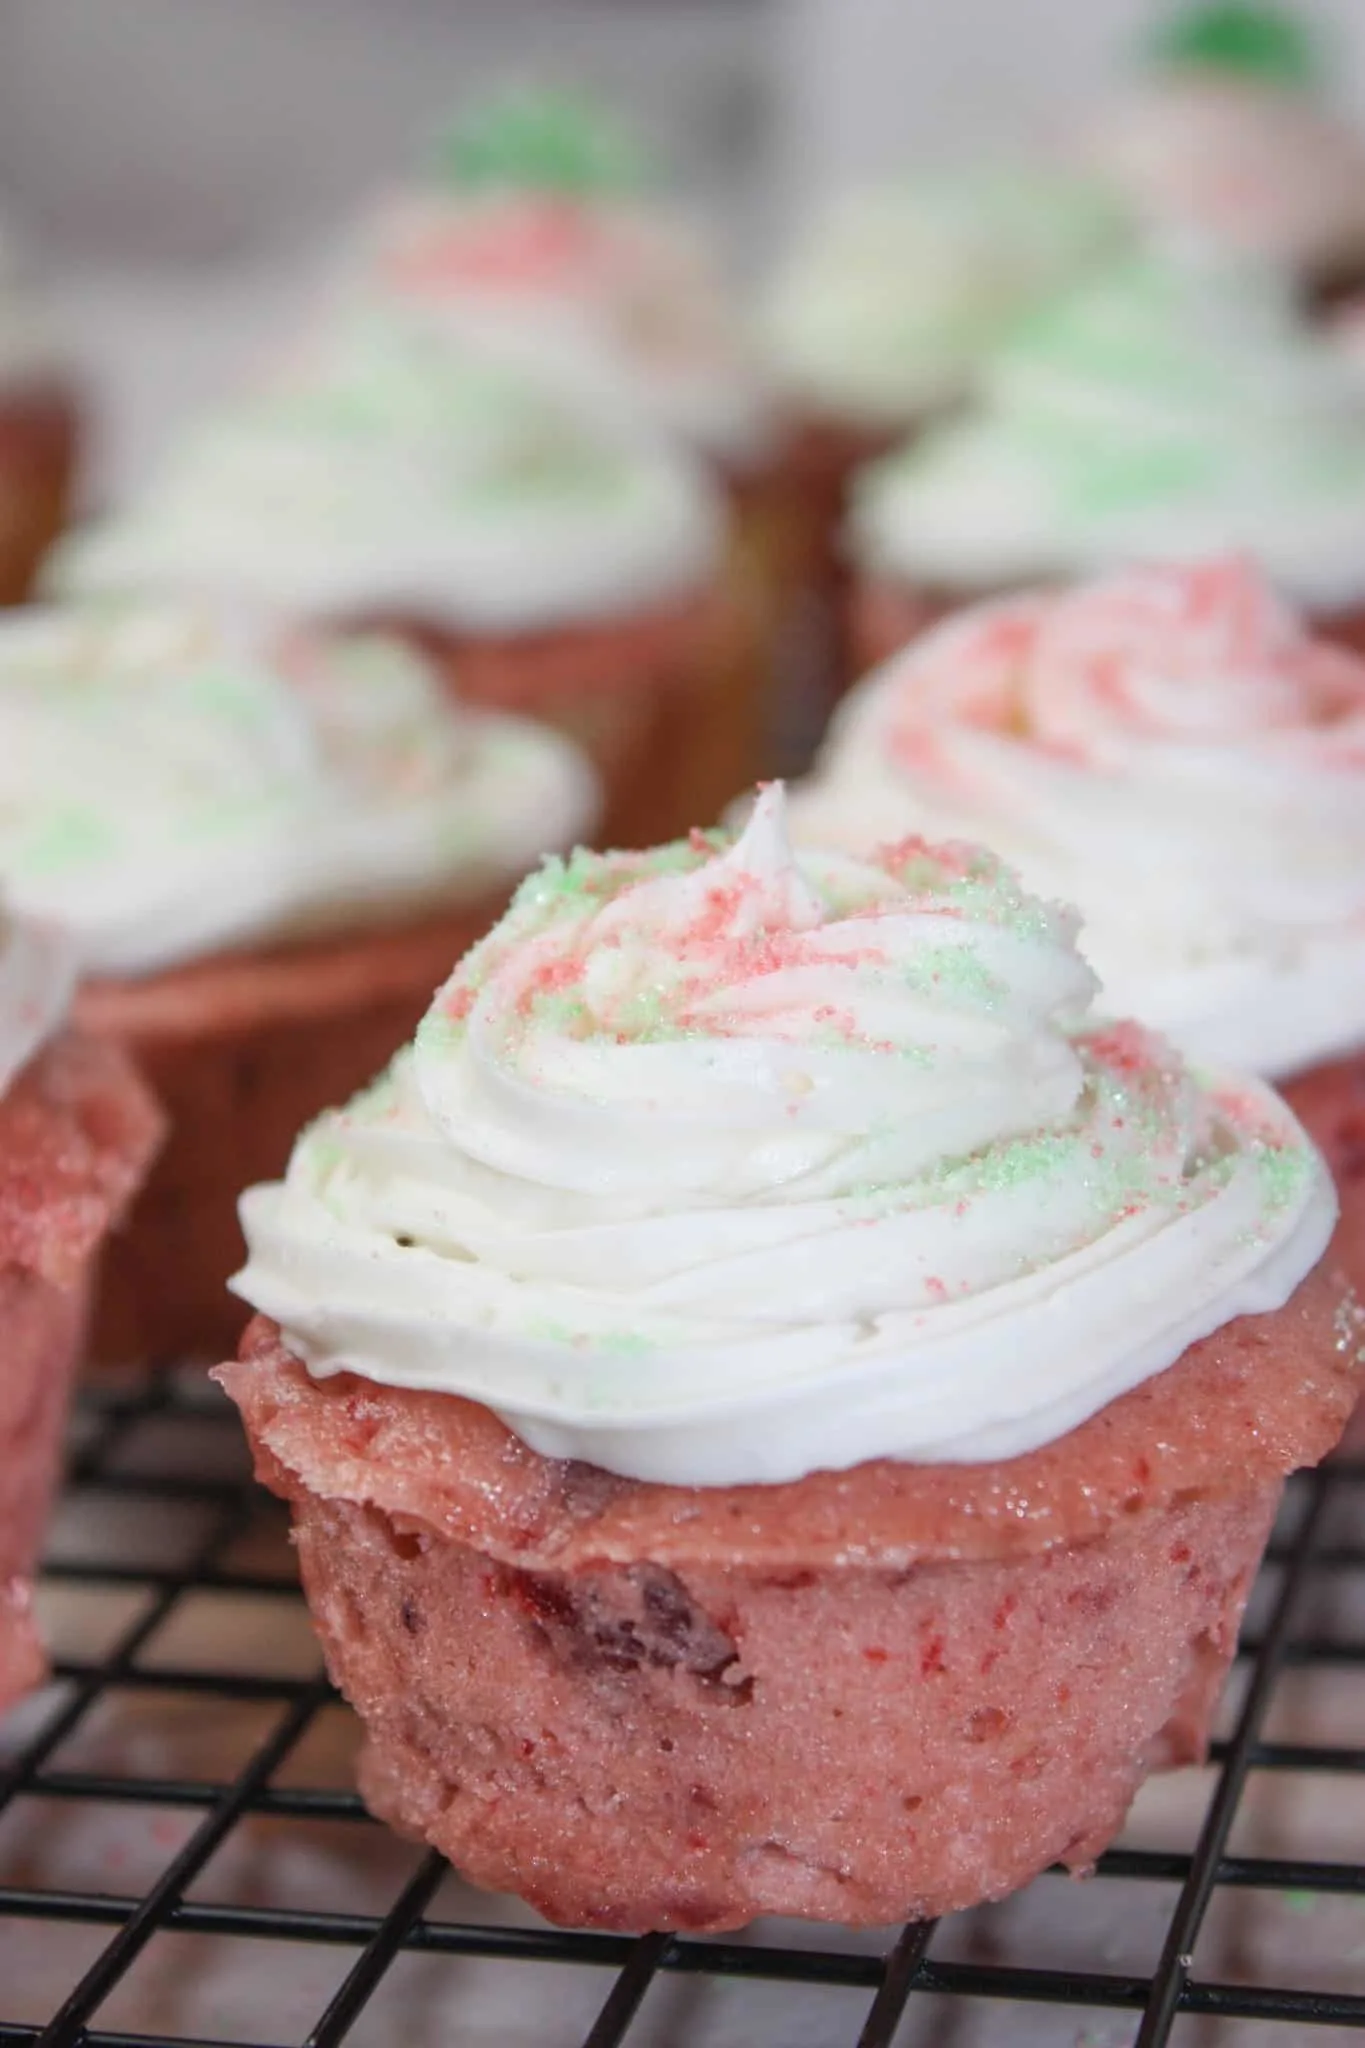 Microwave Cherry Cranberry Cupcakes are a quick and easy gluten free dessert.  This moist, colourful cake decorated to suit the season is a great addition to any holiday dessert tray.